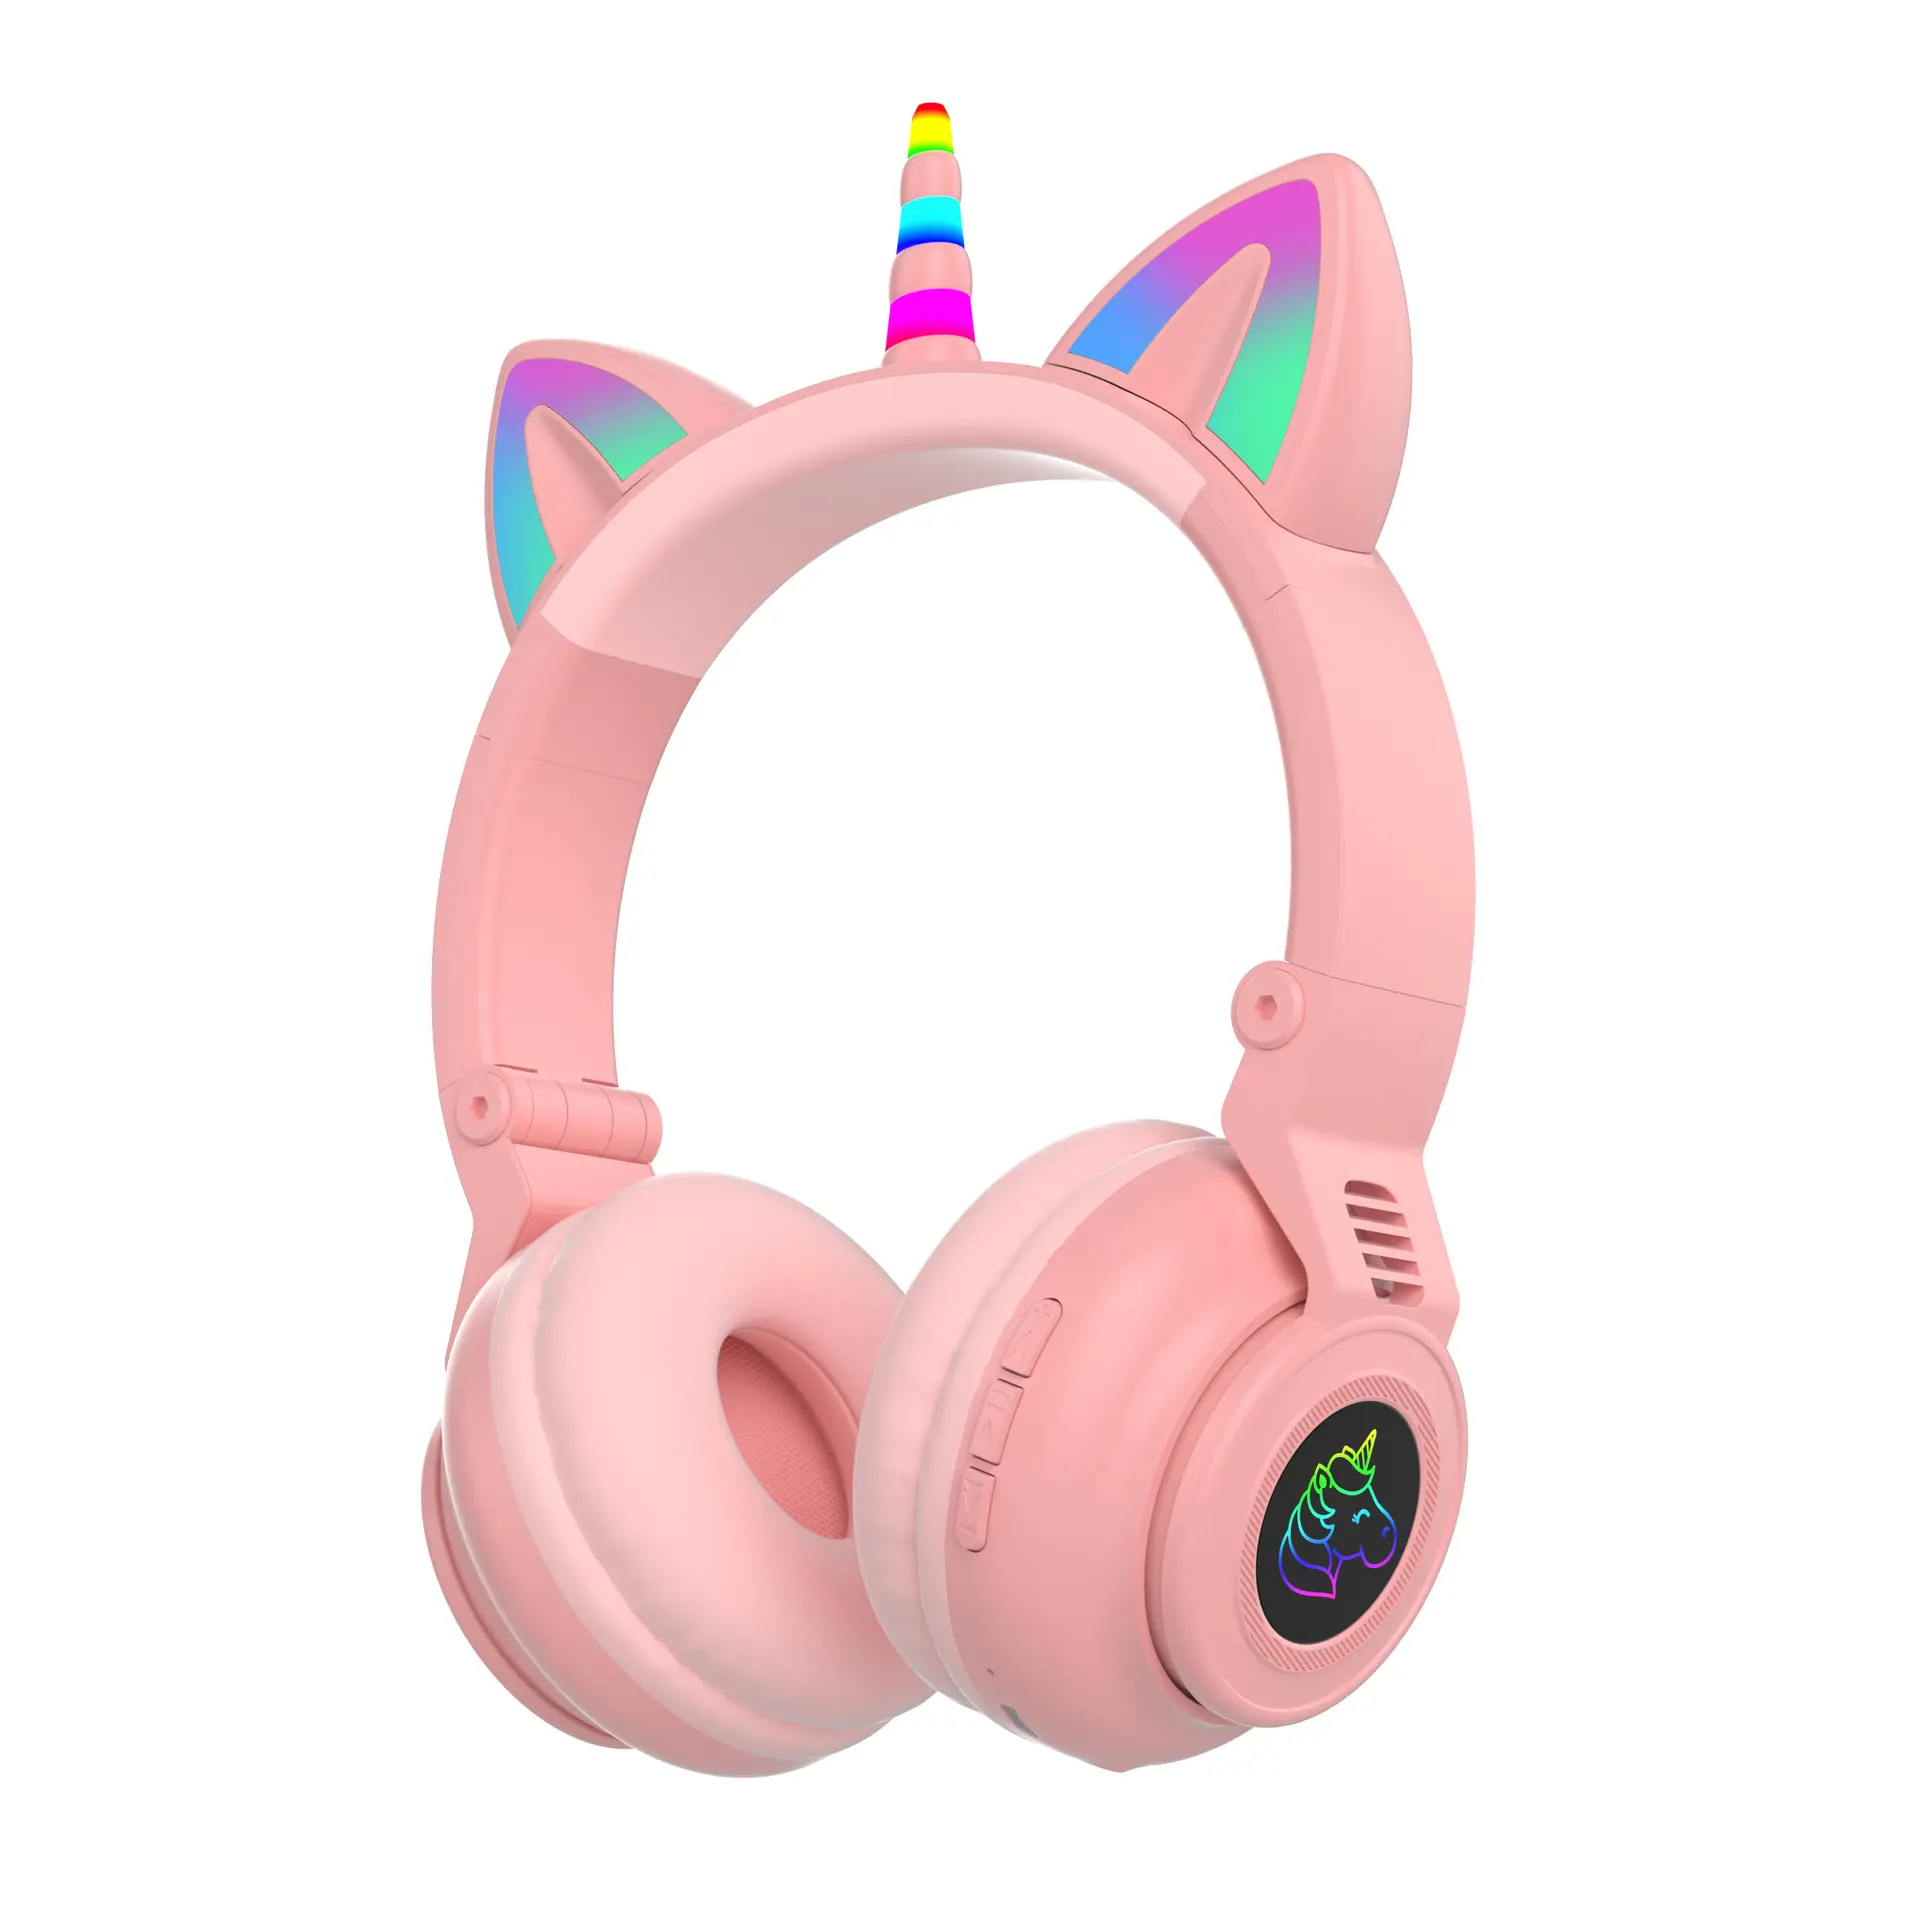 Unicorn Bluetooths Headphone Headset Music Game Trend Cute Cat Ear Wireless Headset Headphone for Android